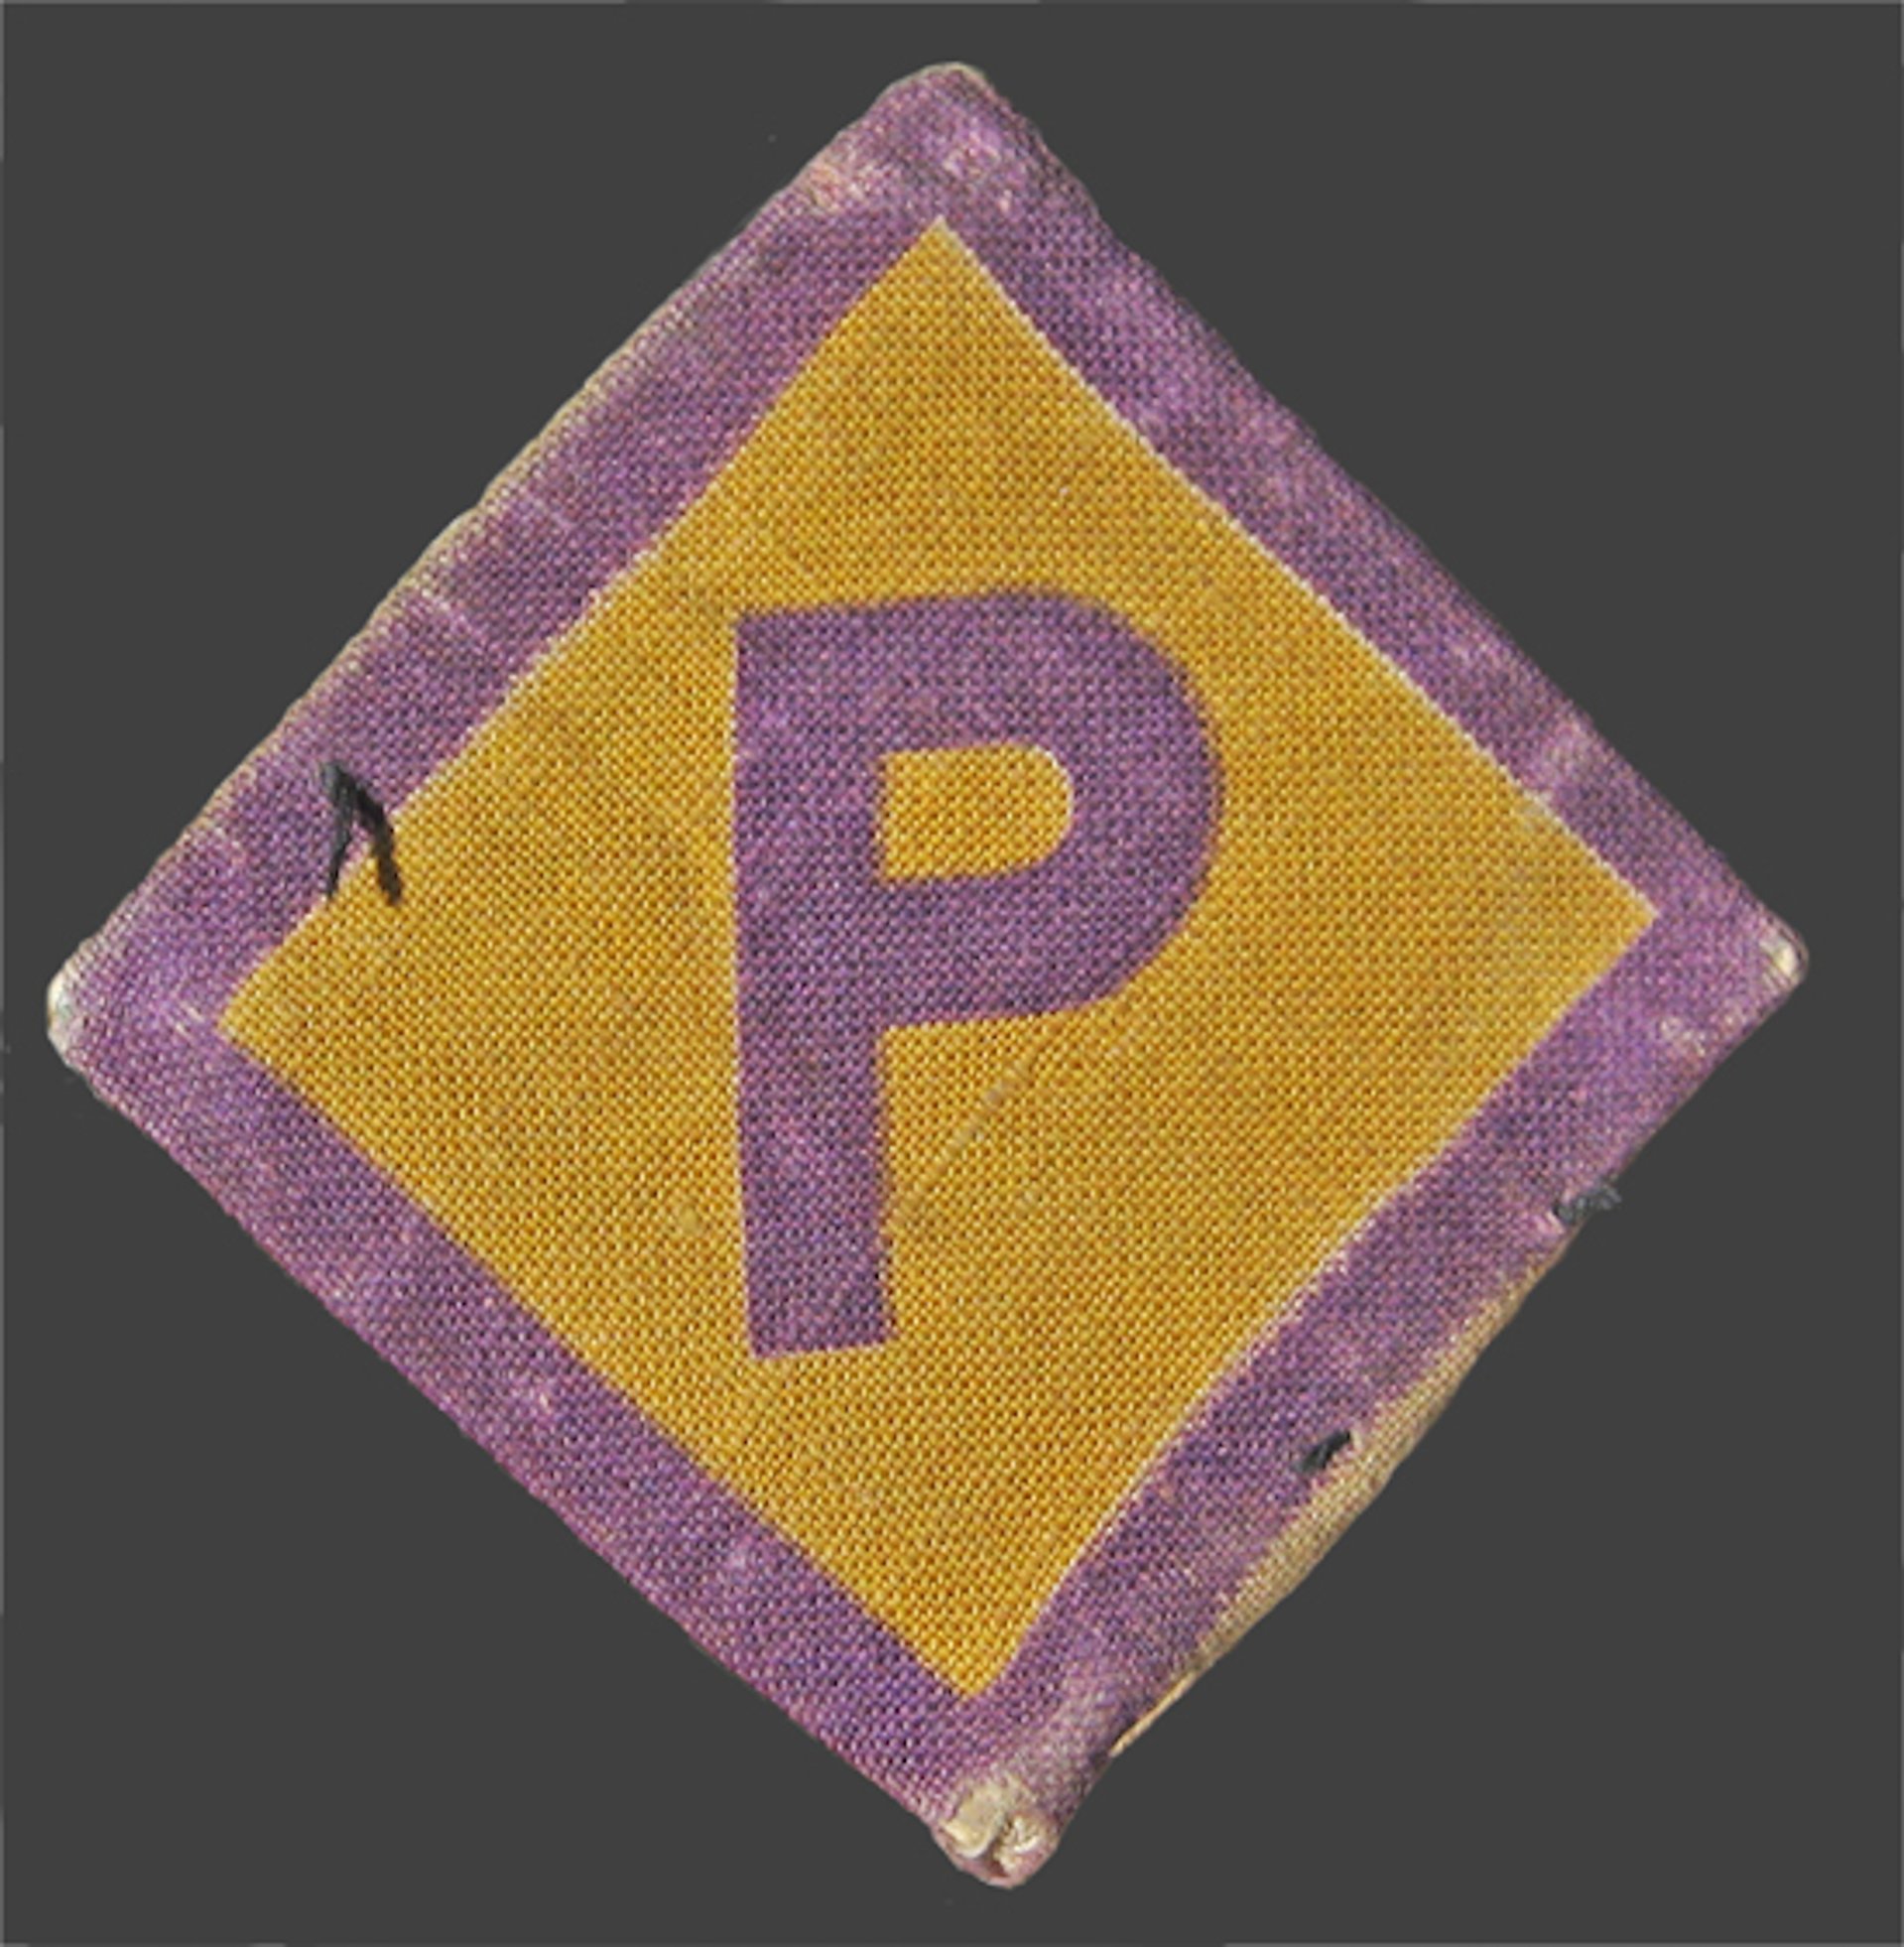 A square yellow badge edged in purple with a purple “P” in the middle.